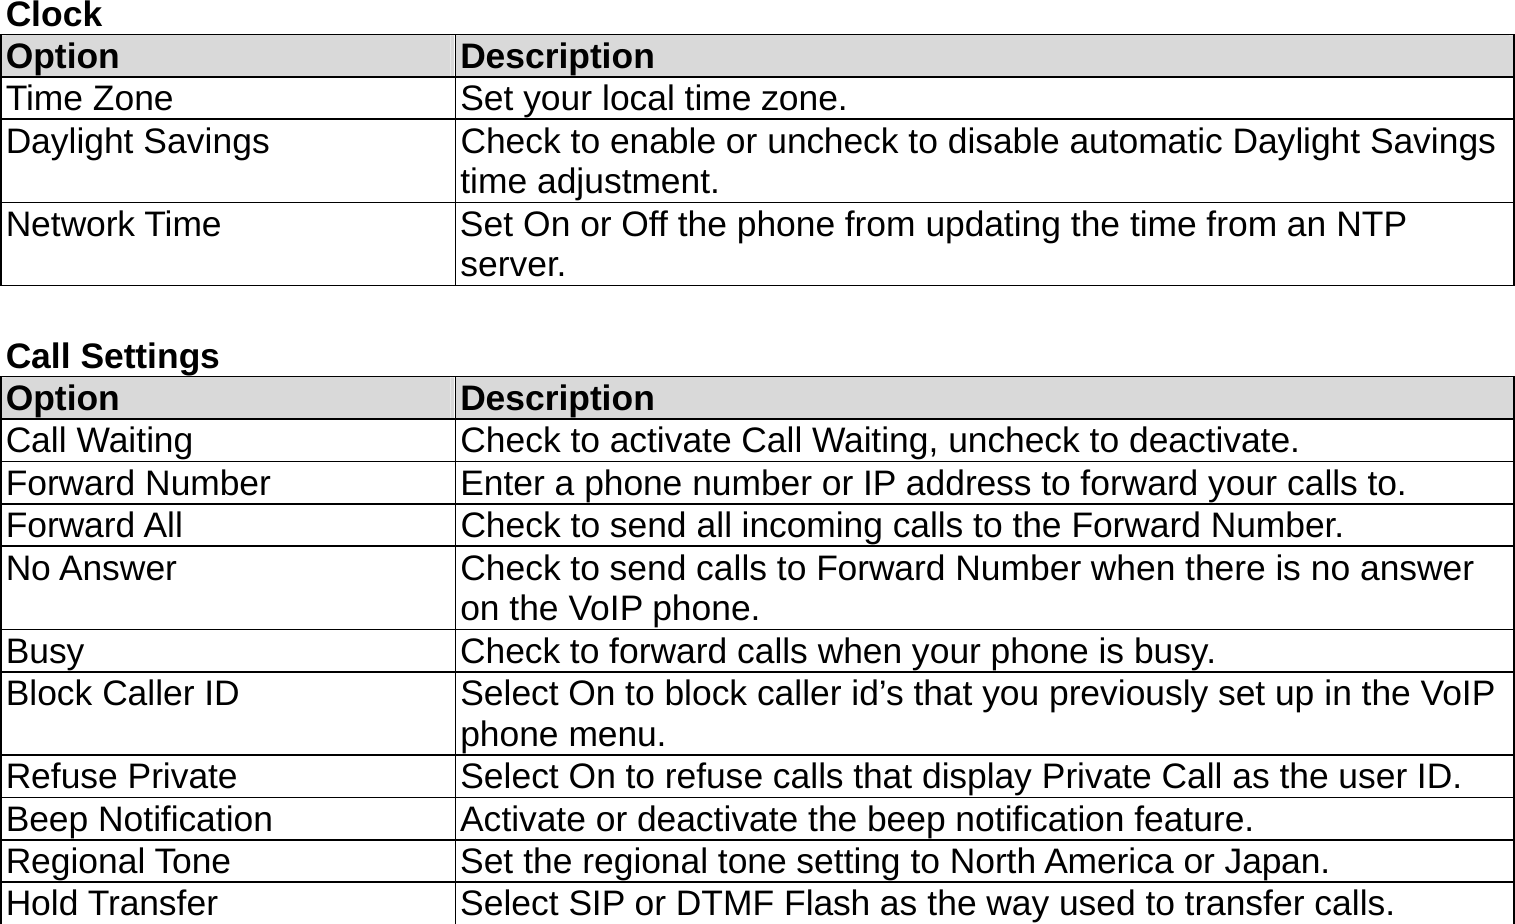 Clock Option  Description Time Zone  Set your local time zone. Daylight Savings  Check to enable or uncheck to disable automatic Daylight Savings time adjustment. Network Time  Set On or Off the phone from updating the time from an NTP server.  Call Settings Option  Description Call Waiting  Check to activate Call Waiting, uncheck to deactivate. Forward Number  Enter a phone number or IP address to forward your calls to. Forward All  Check to send all incoming calls to the Forward Number. No Answer  Check to send calls to Forward Number when there is no answer on the VoIP phone. Busy  Check to forward calls when your phone is busy. Block Caller ID  Select On to block caller id’s that you previously set up in the VoIP phone menu. Refuse Private  Select On to refuse calls that display Private Call as the user ID. Beep Notification  Activate or deactivate the beep notification feature. Regional Tone  Set the regional tone setting to North America or Japan.   Hold Transfer  Select SIP or DTMF Flash as the way used to transfer calls.  